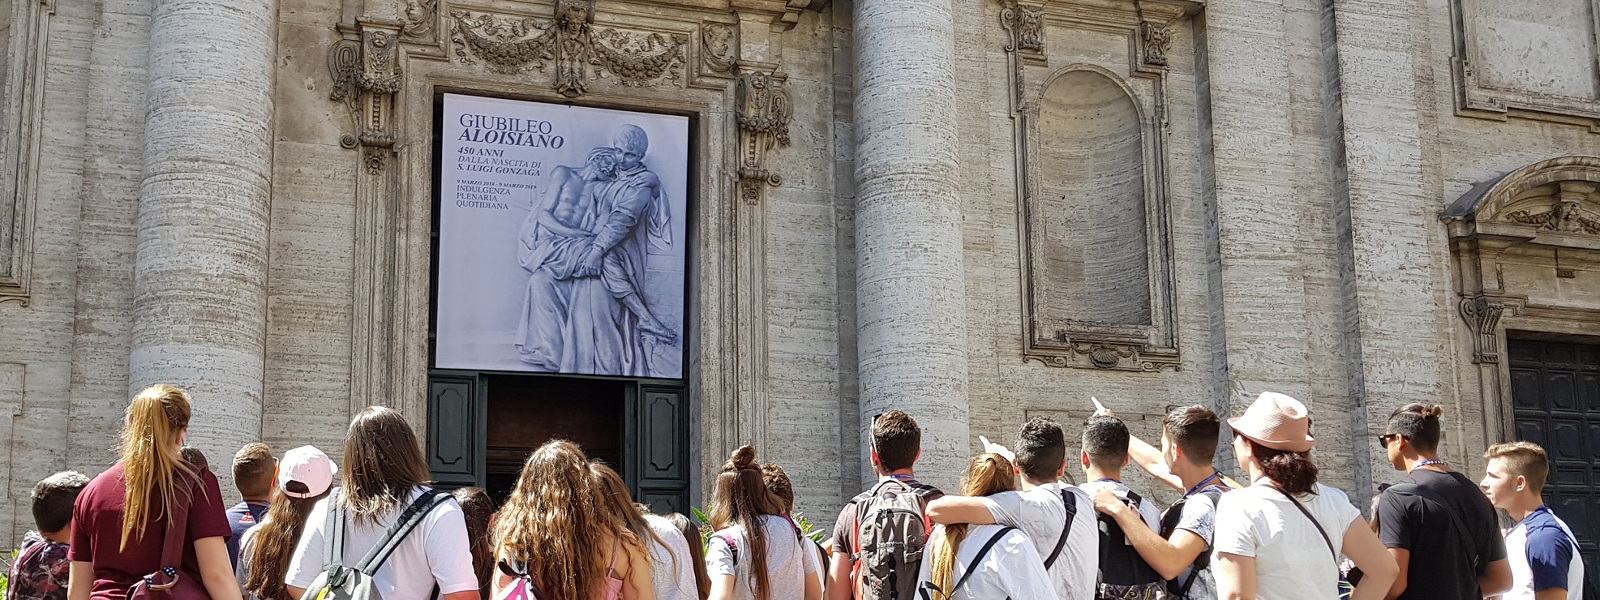 Group of young people visiting the church of Saint Ignatius in Rome on the occasion of the Aloysian Jubilee (2018-2019)